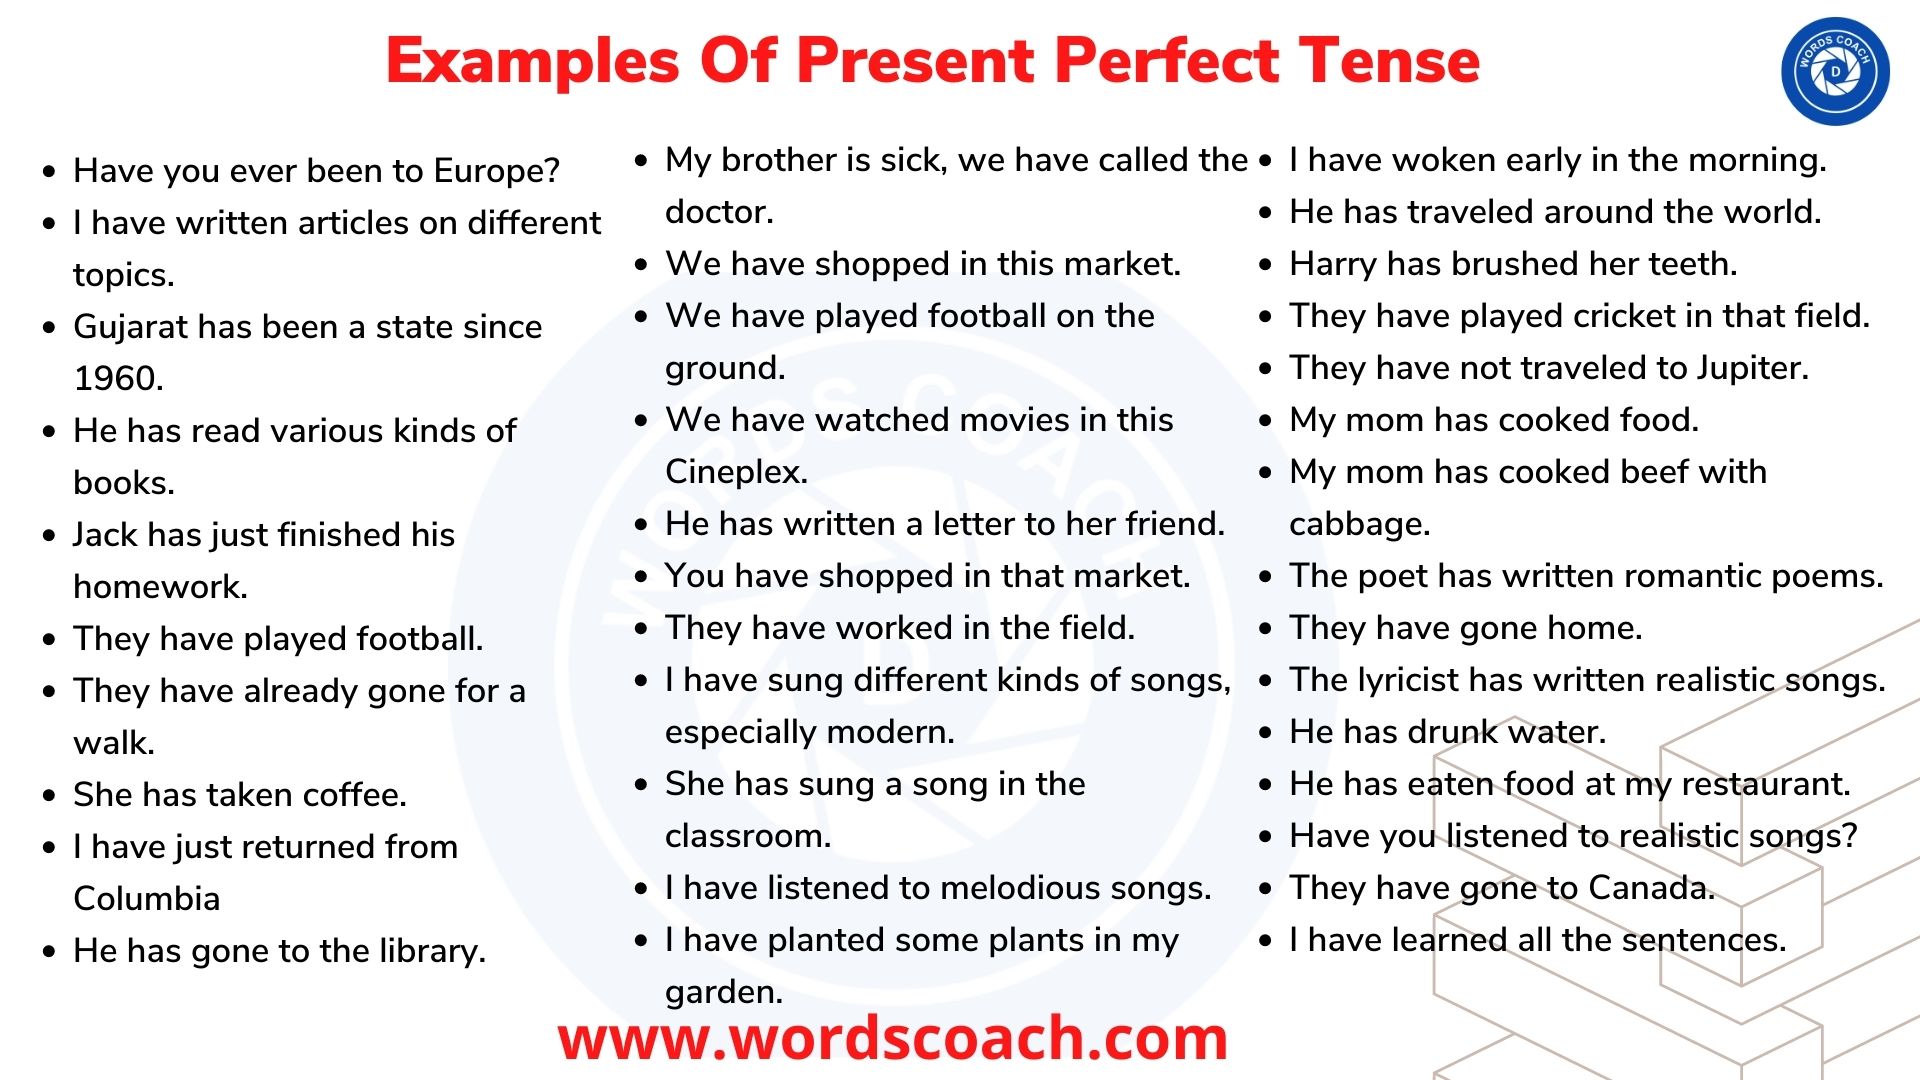 Examples Of Present Perfect Tense